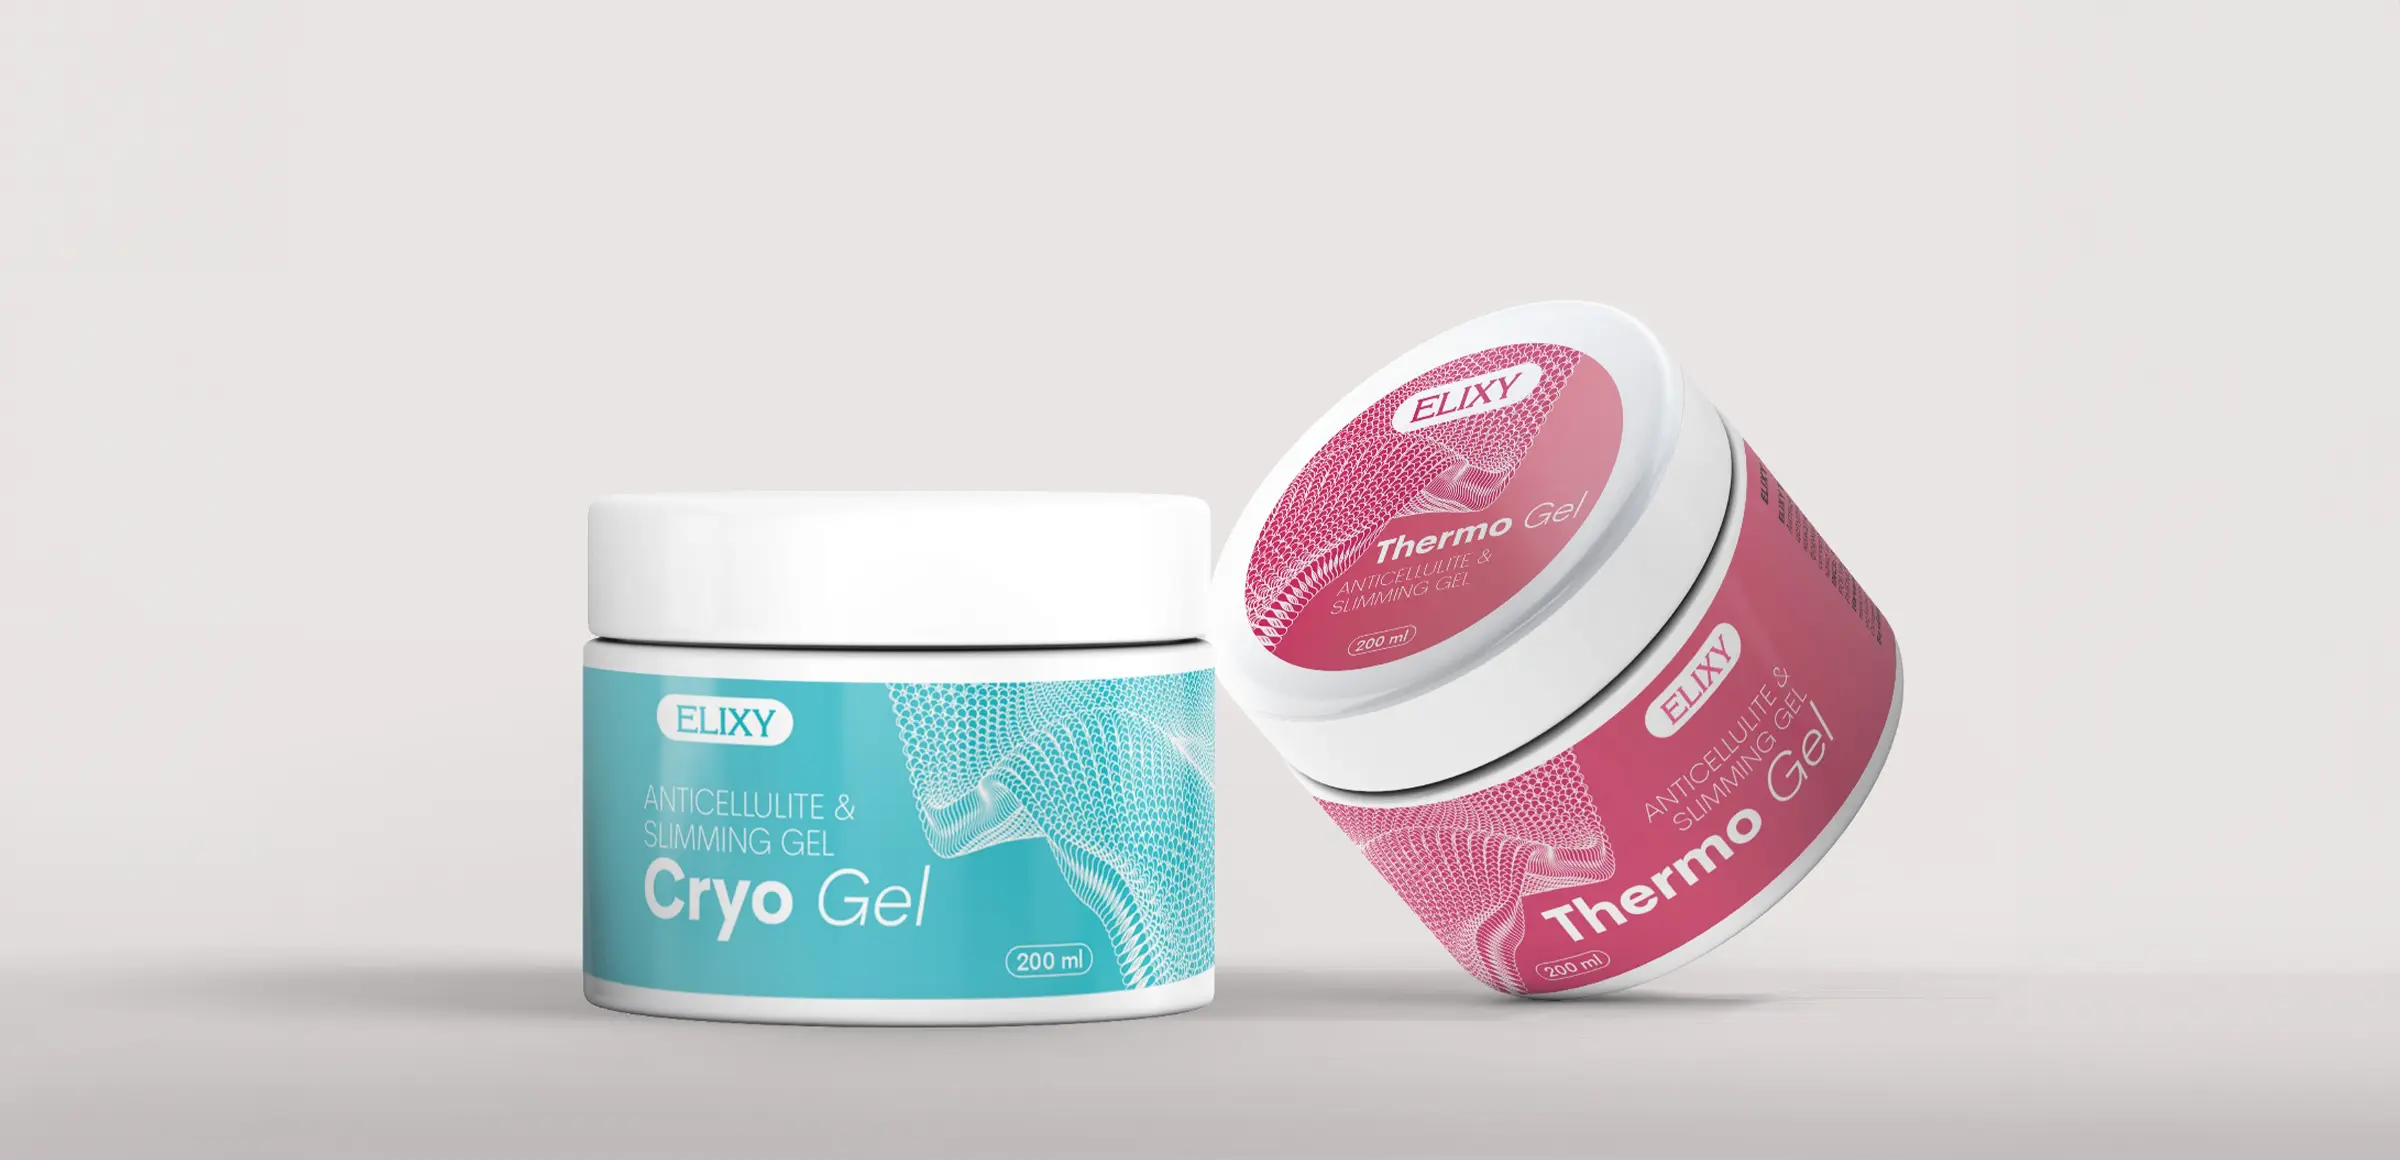 Packaging Labels for the two gels, thermo and cryo gel, on a mockup and clear background